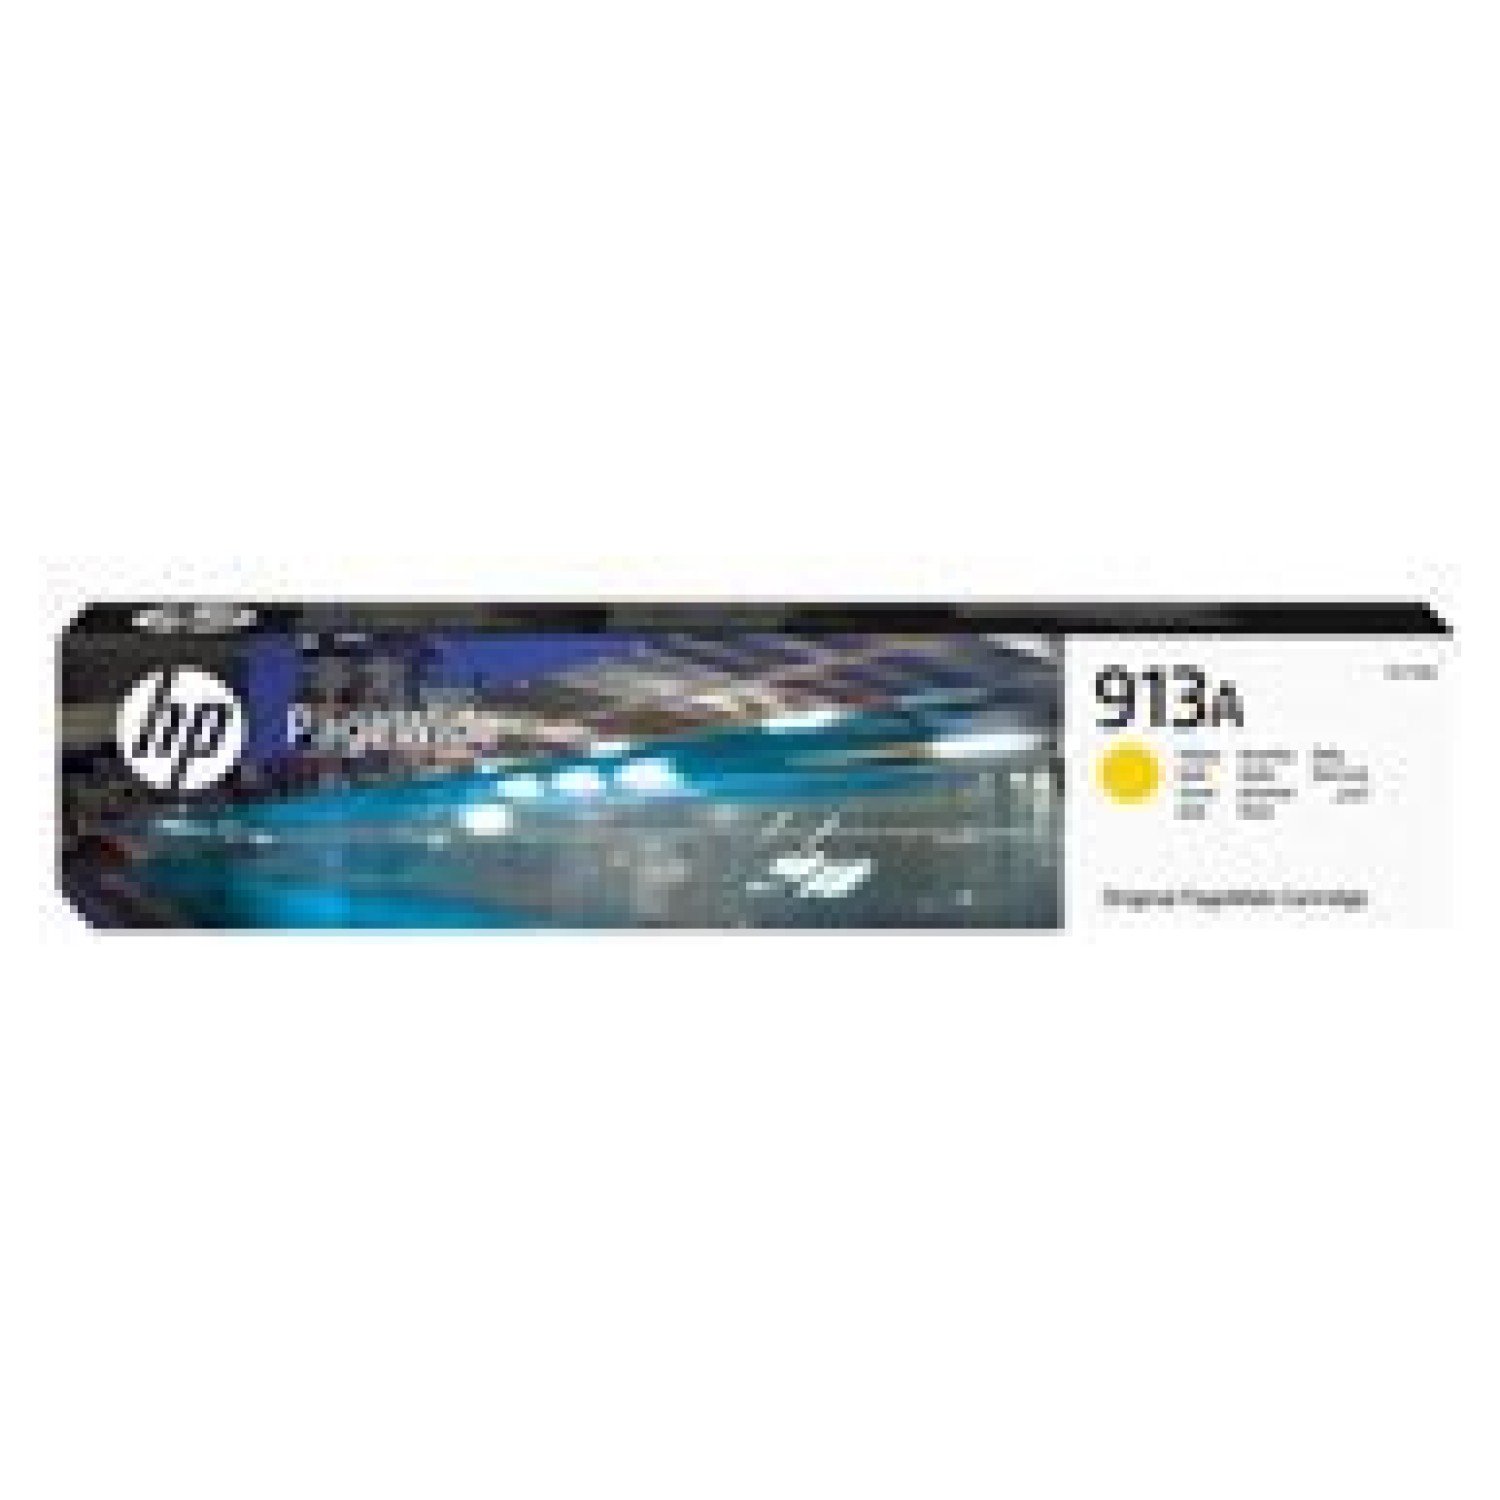 HP 913A Yellow PageWide cartridge